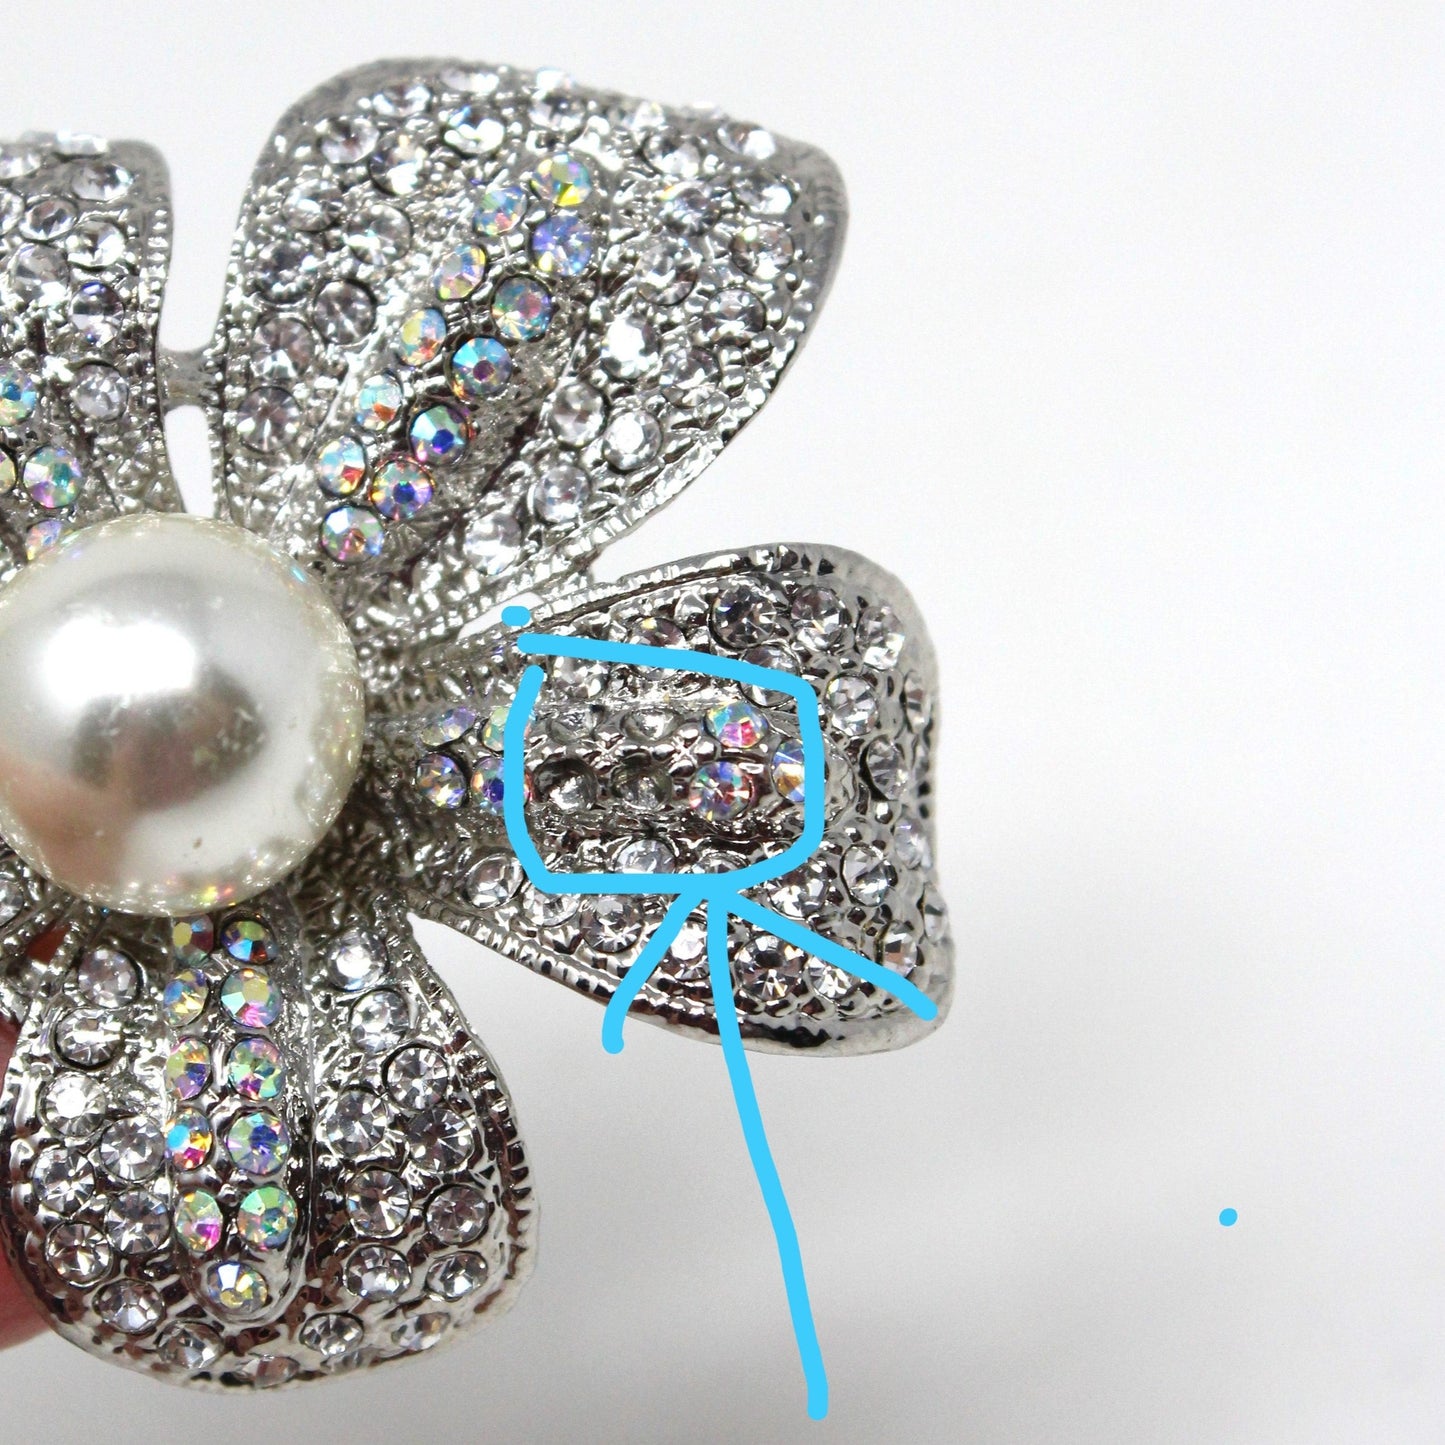 Brooch / Pin, Flower Rhinestone Petals with Large Pearl Center, Silver Tone